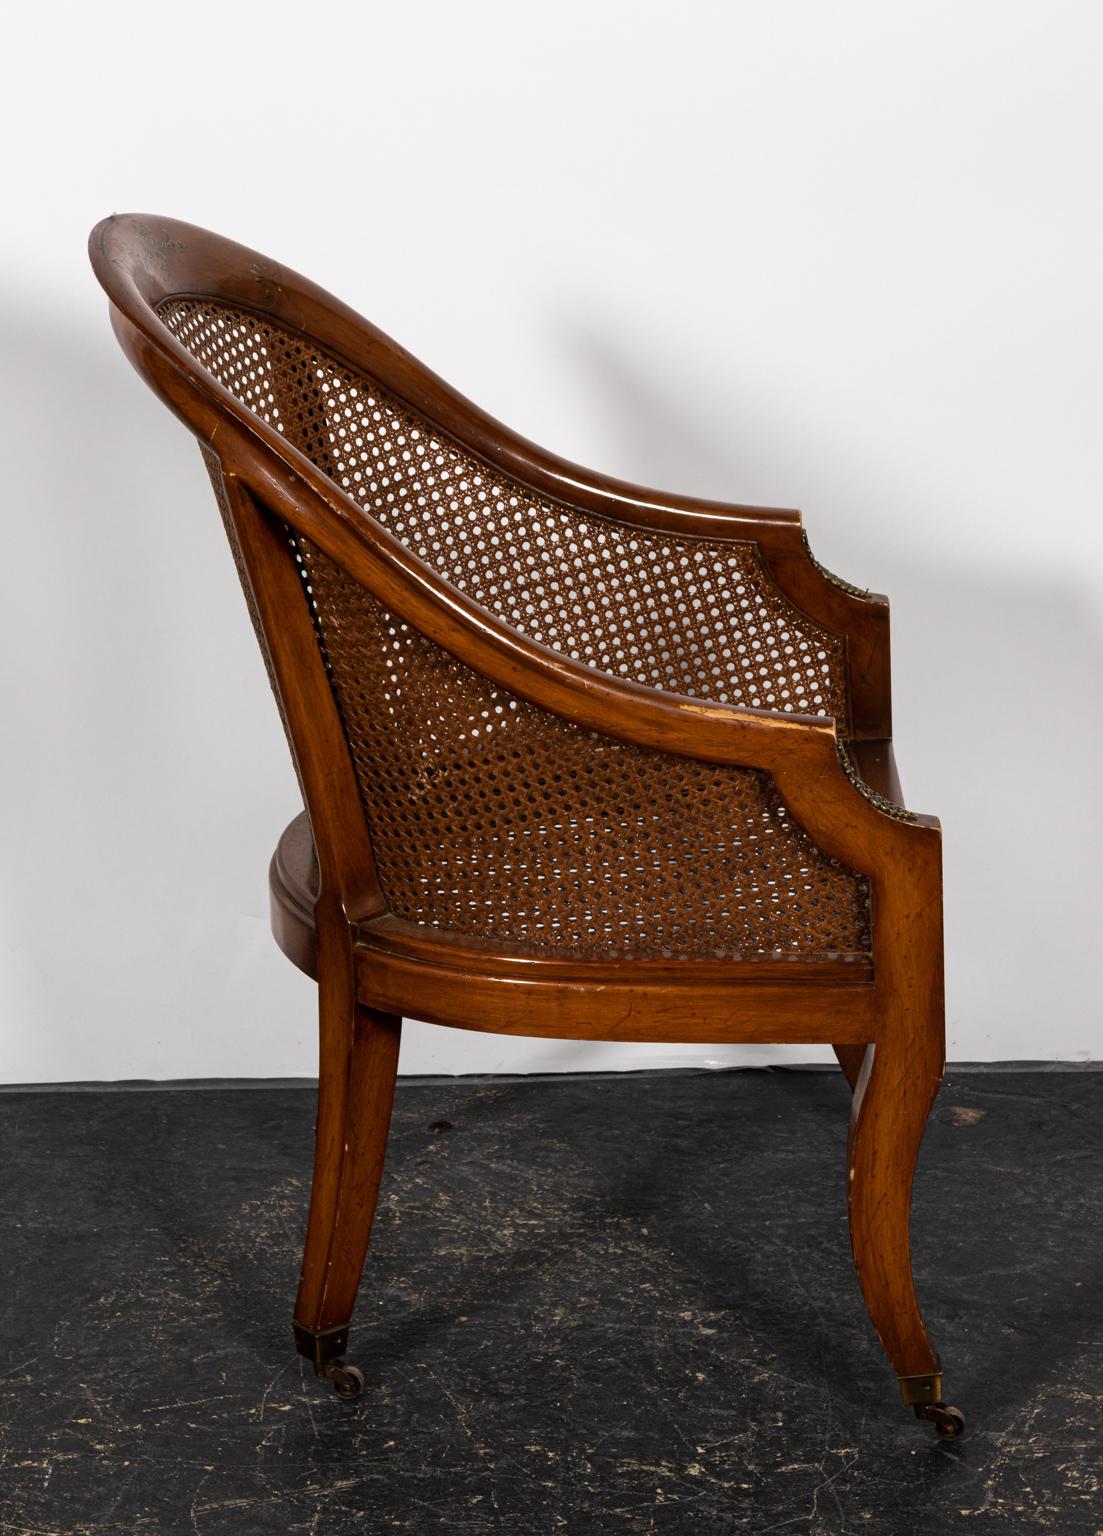 Pair of Walnut Spoon Back Chairs 1